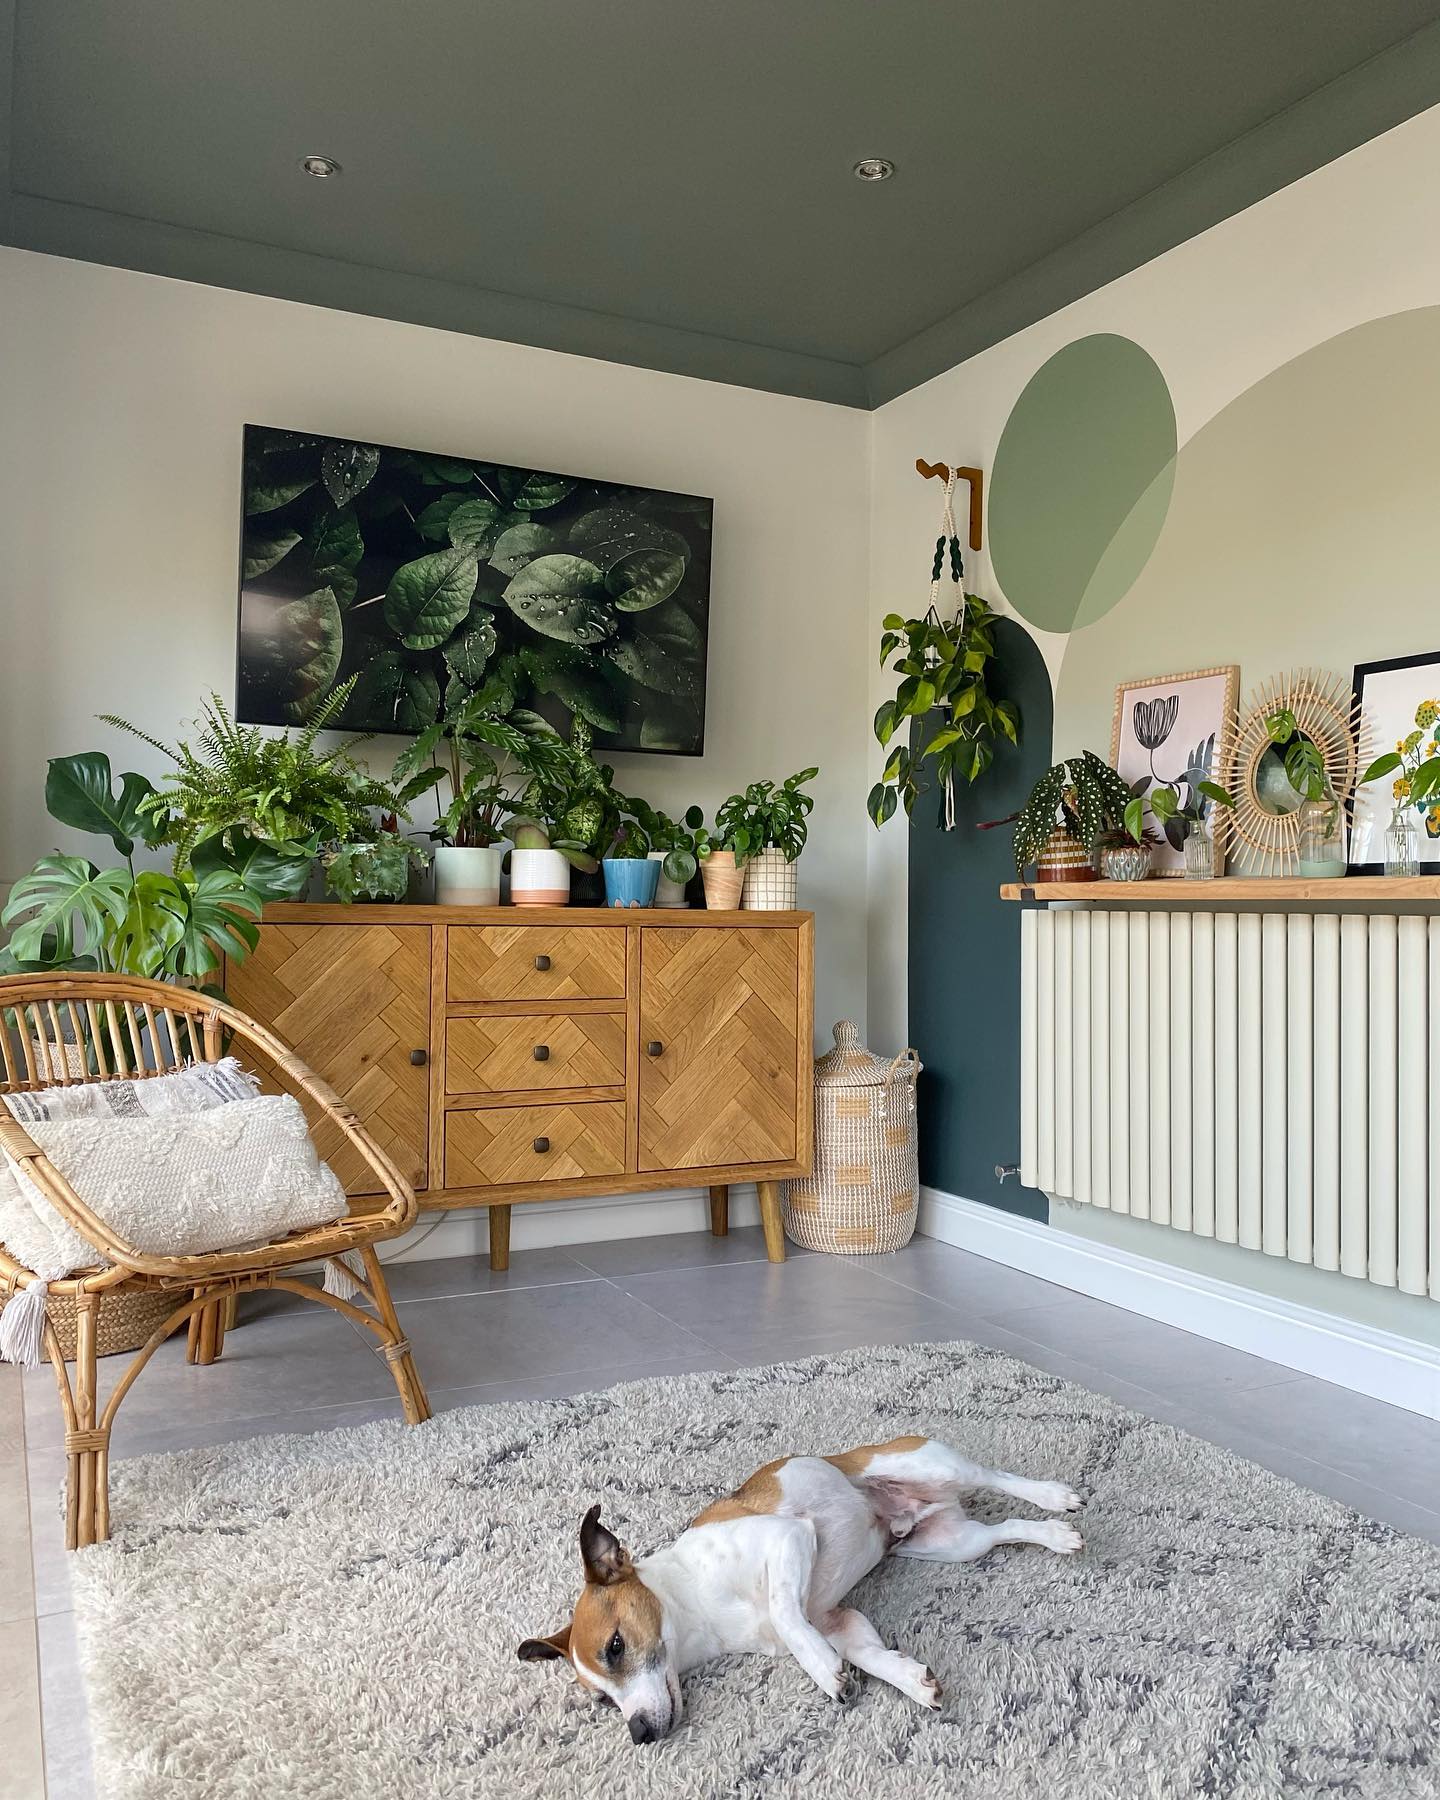 Living room with the Parquet sideboard topped with lots of green plants and a dog in the foreground taking a nap on a fluffy rug.